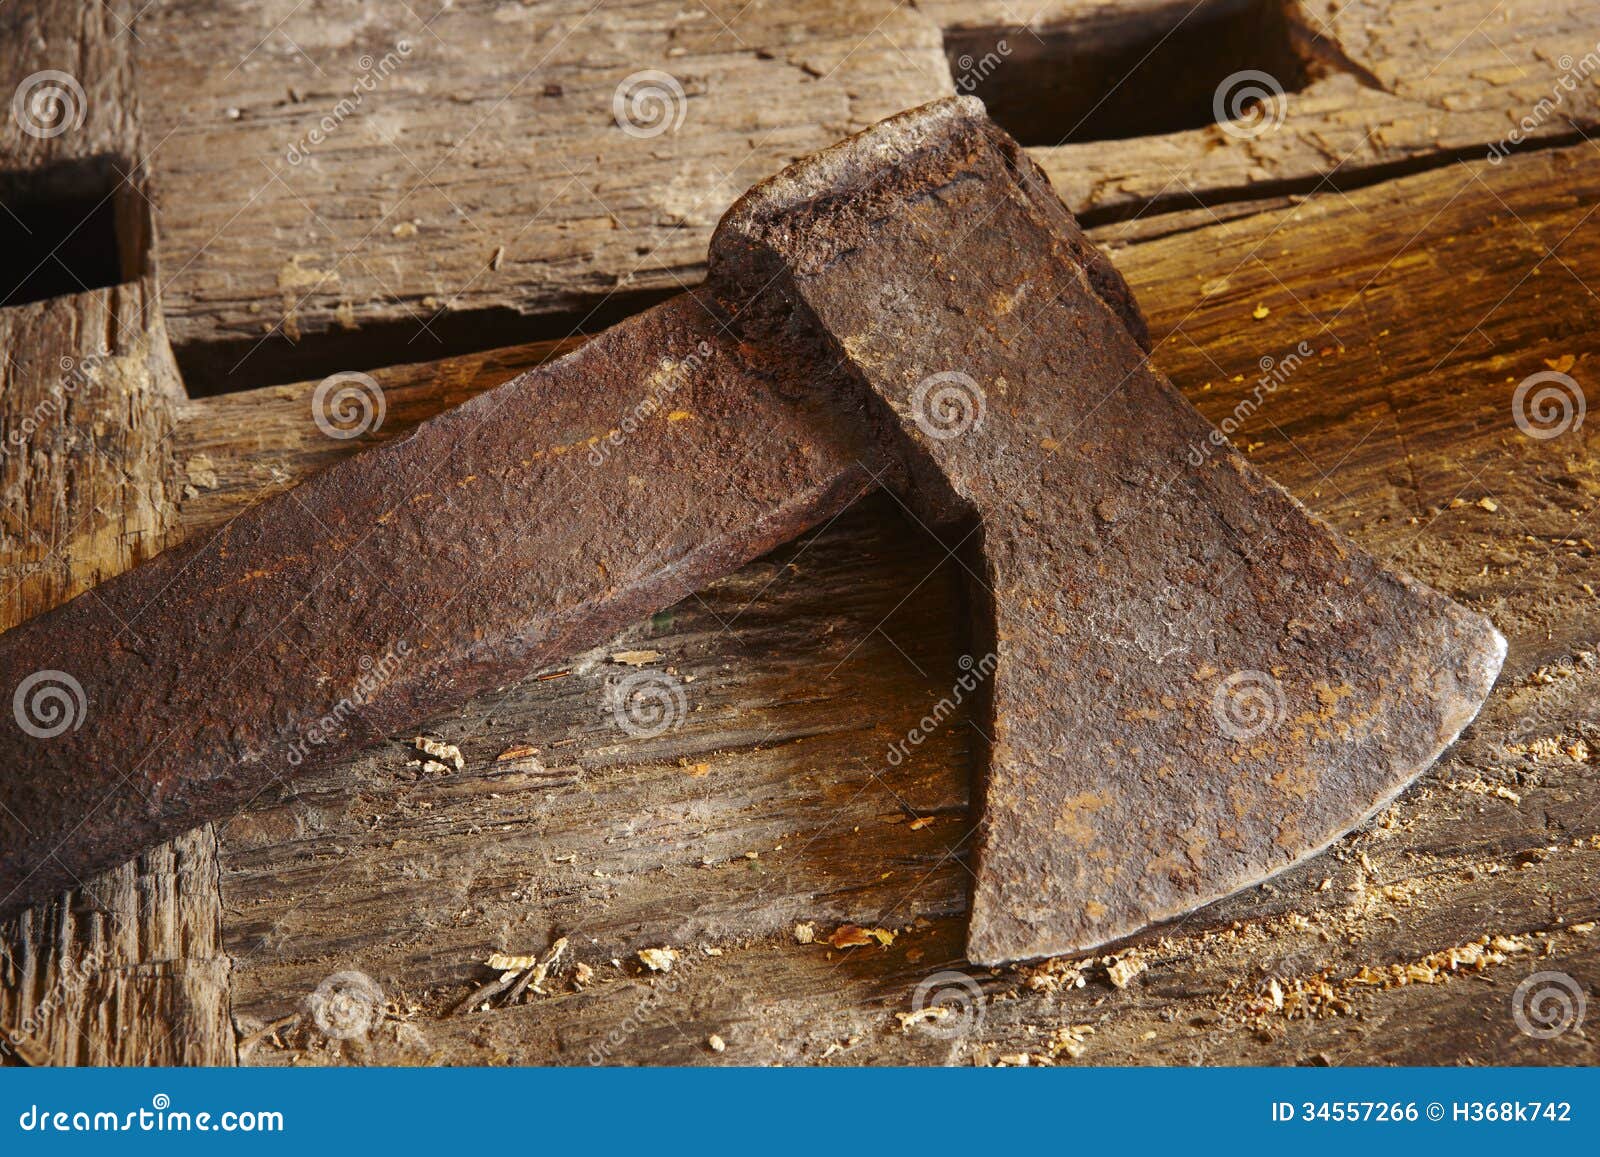 Antique Tools. Axe With Wood Pieces. Stock Photo - Image 